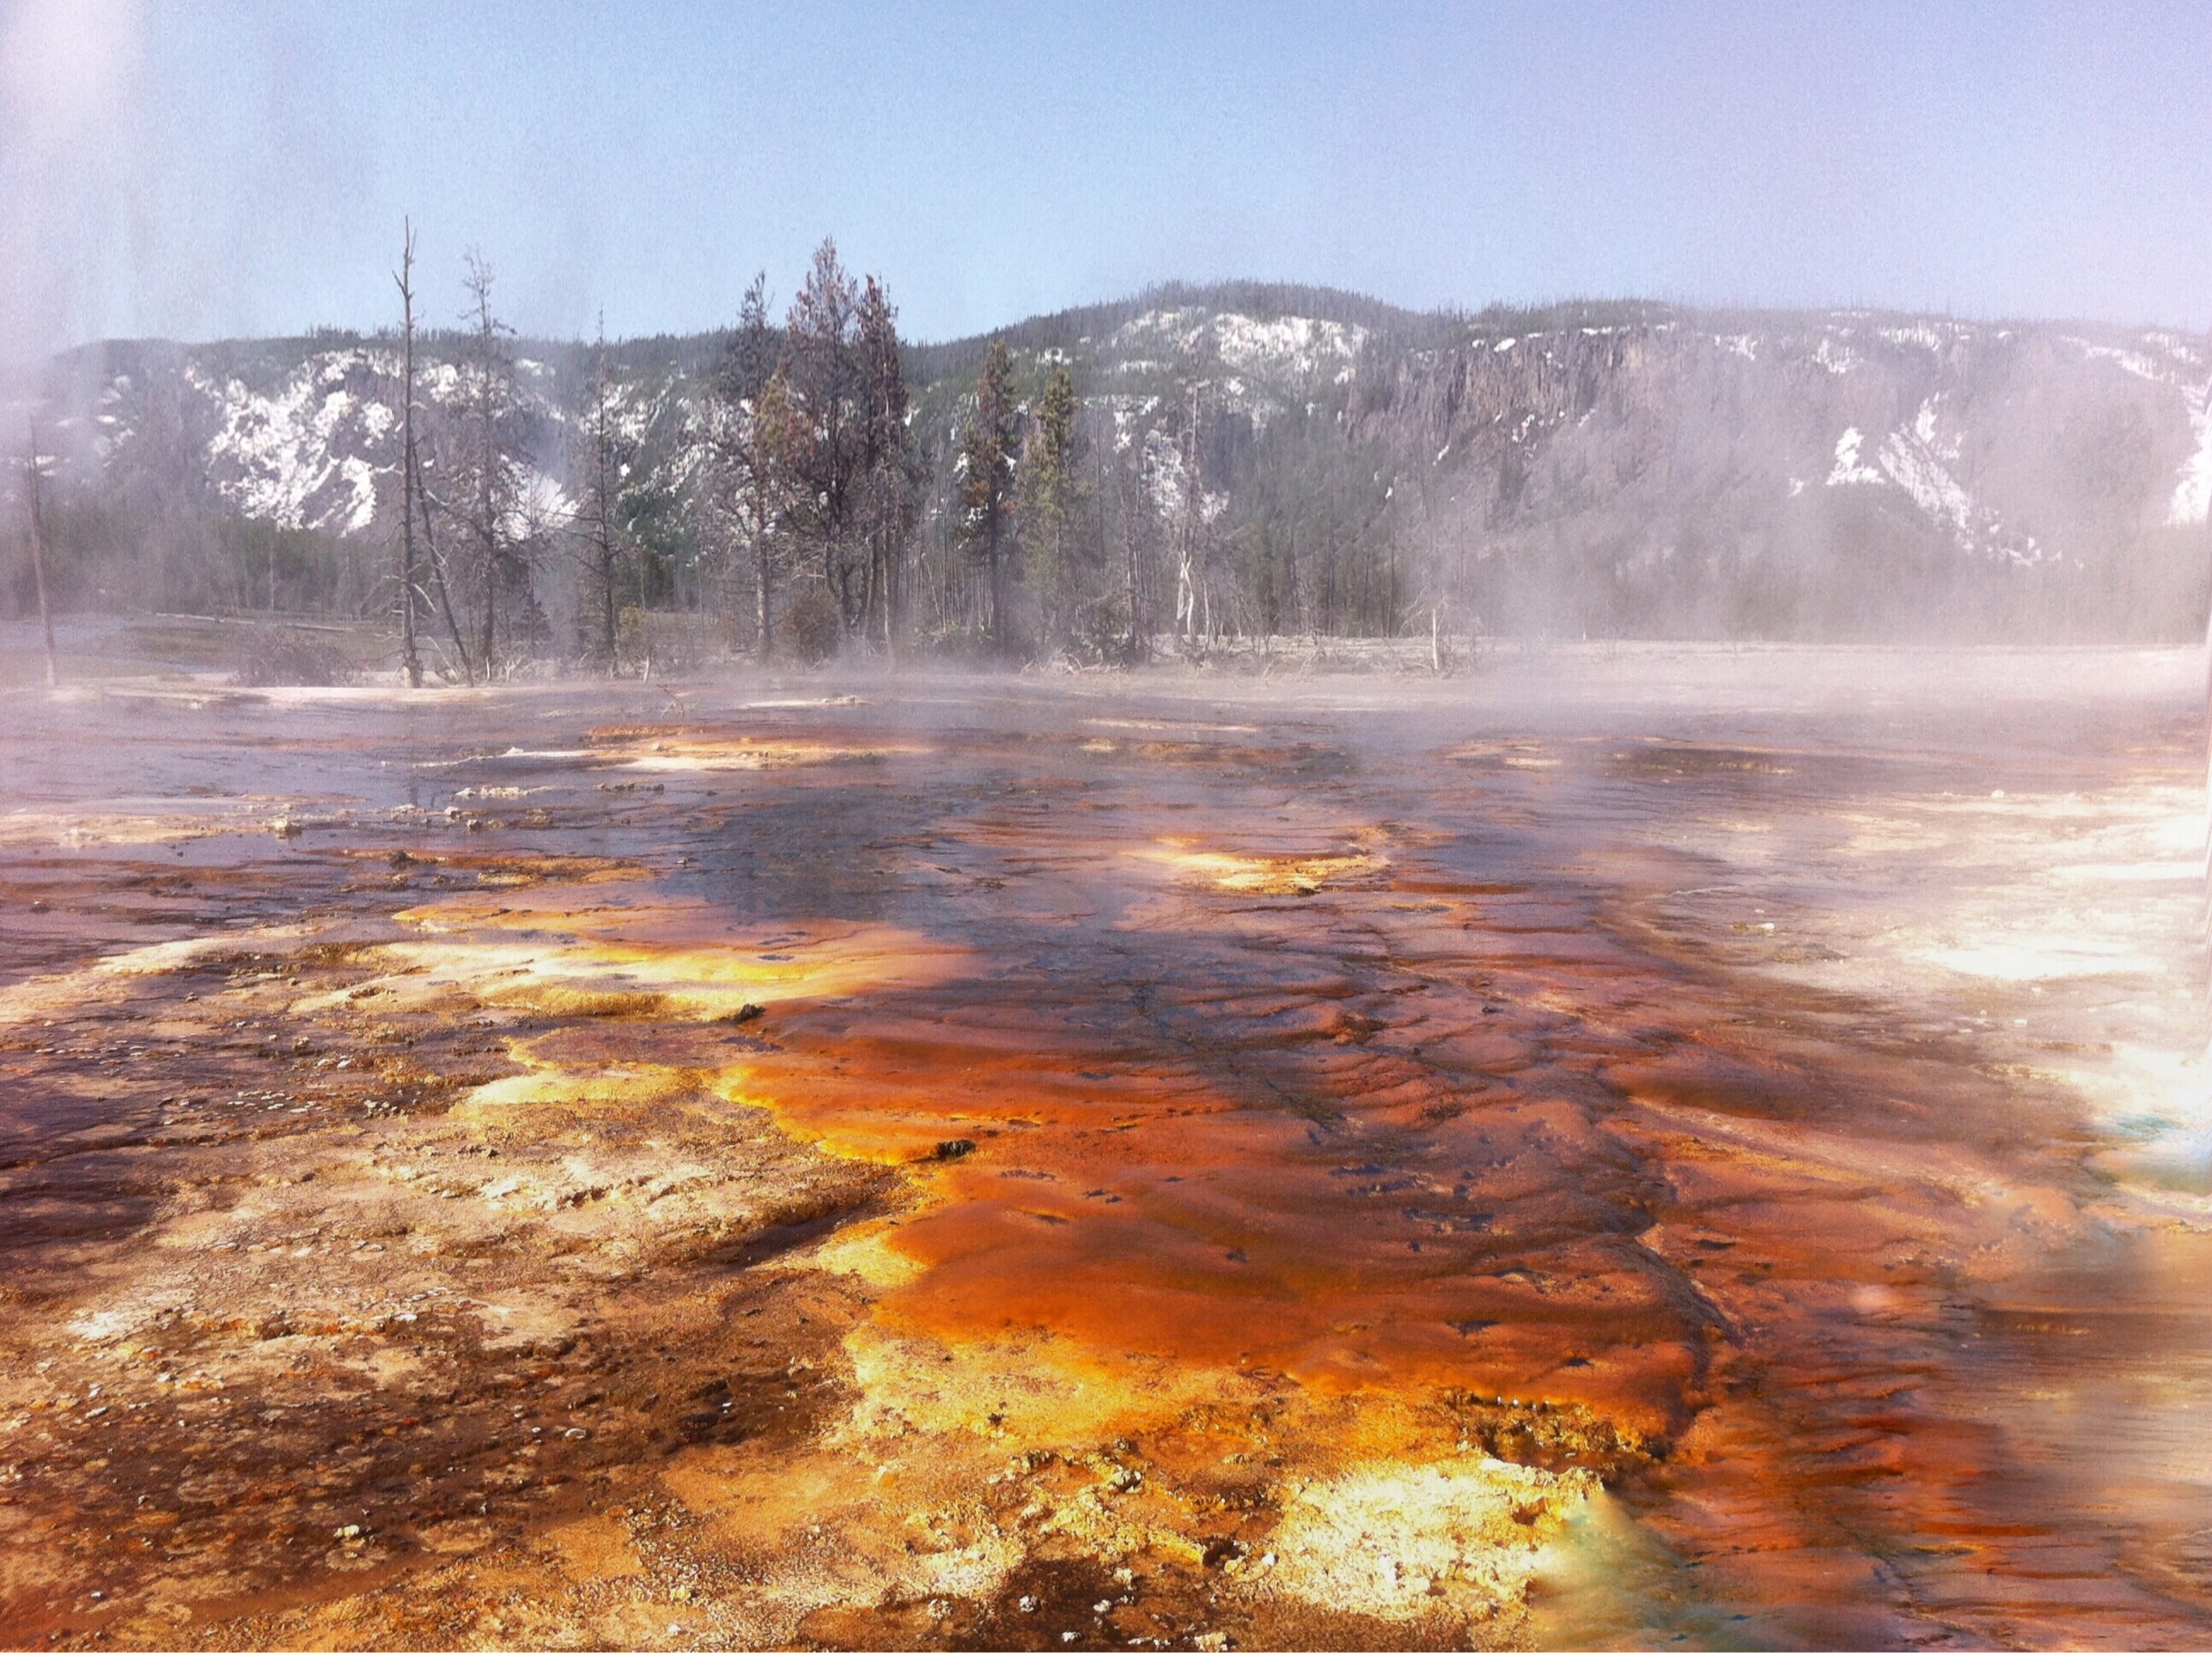 Biscuit Basin in Yellowstone National Park | Expedia.ca